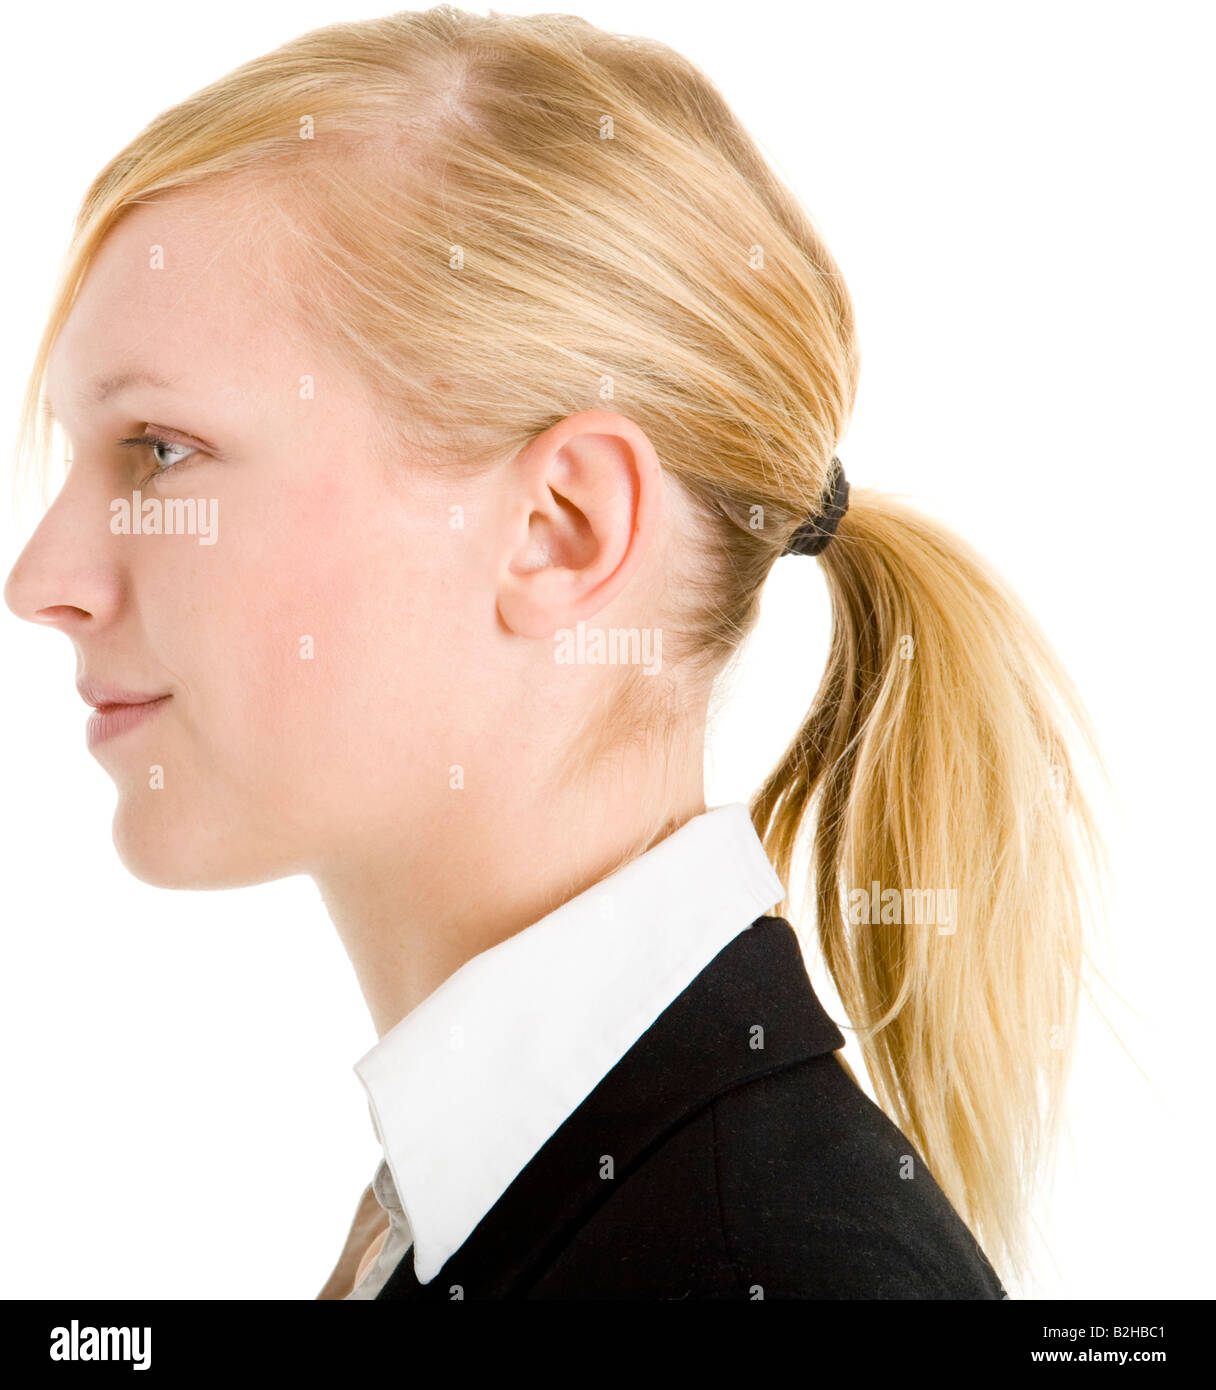 profil young portrait businesswoman blond power woman attentived powerful Stock Photo